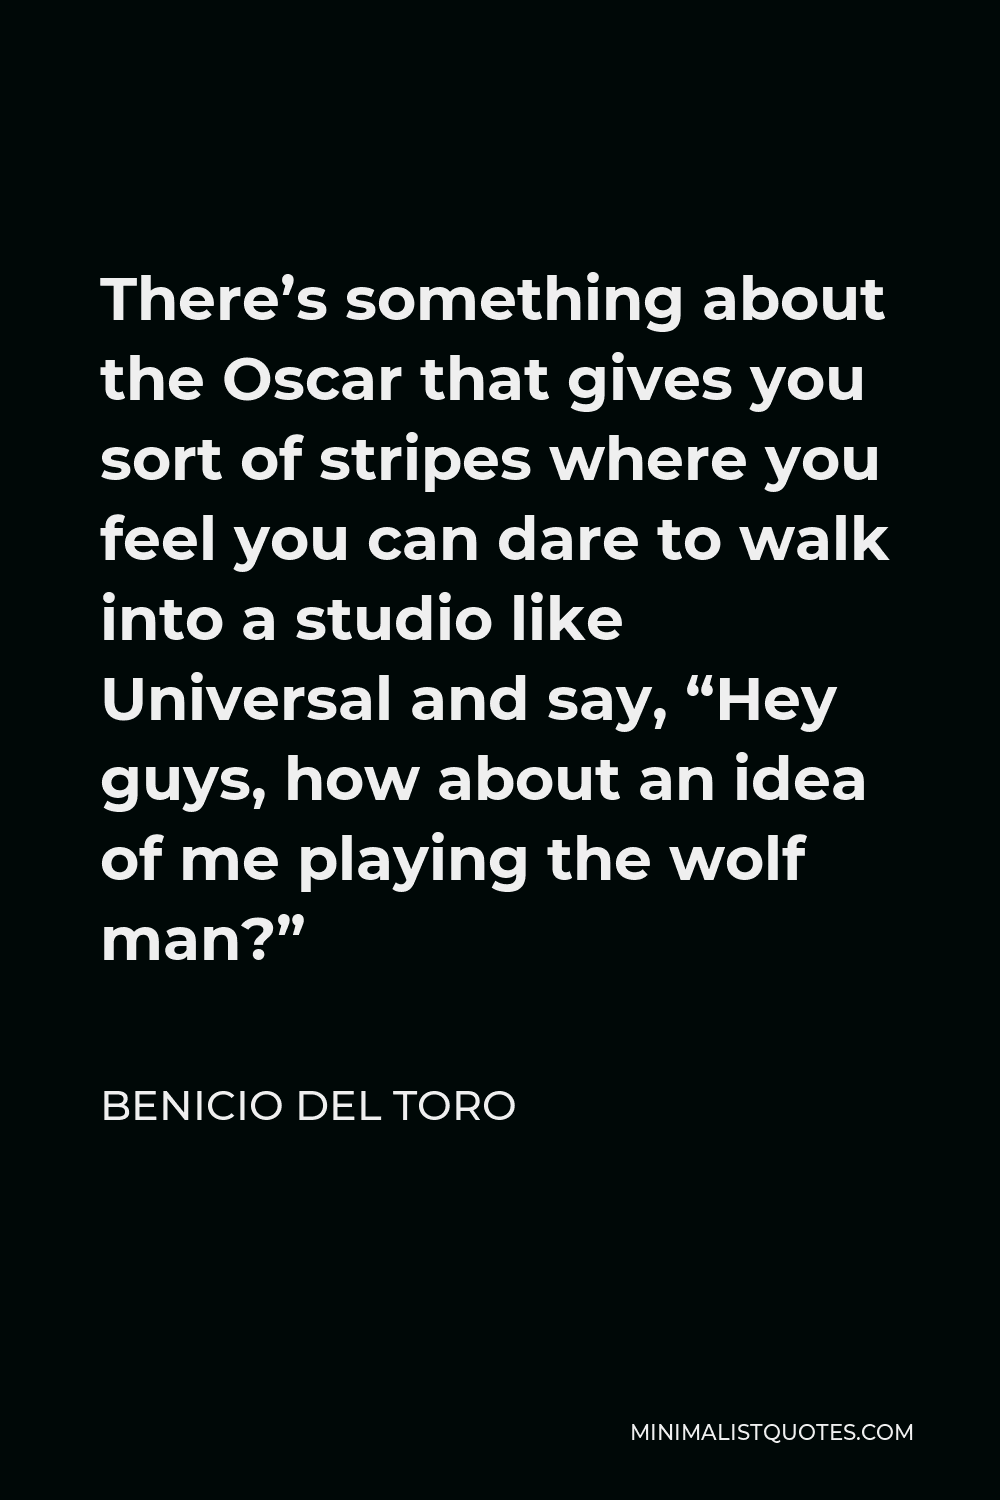 Benicio Del Toro Quote - There’s something about the Oscar that gives you sort of stripes where you feel you can dare to walk into a studio like Universal and say, “Hey guys, how about an idea of me playing the wolf man?”